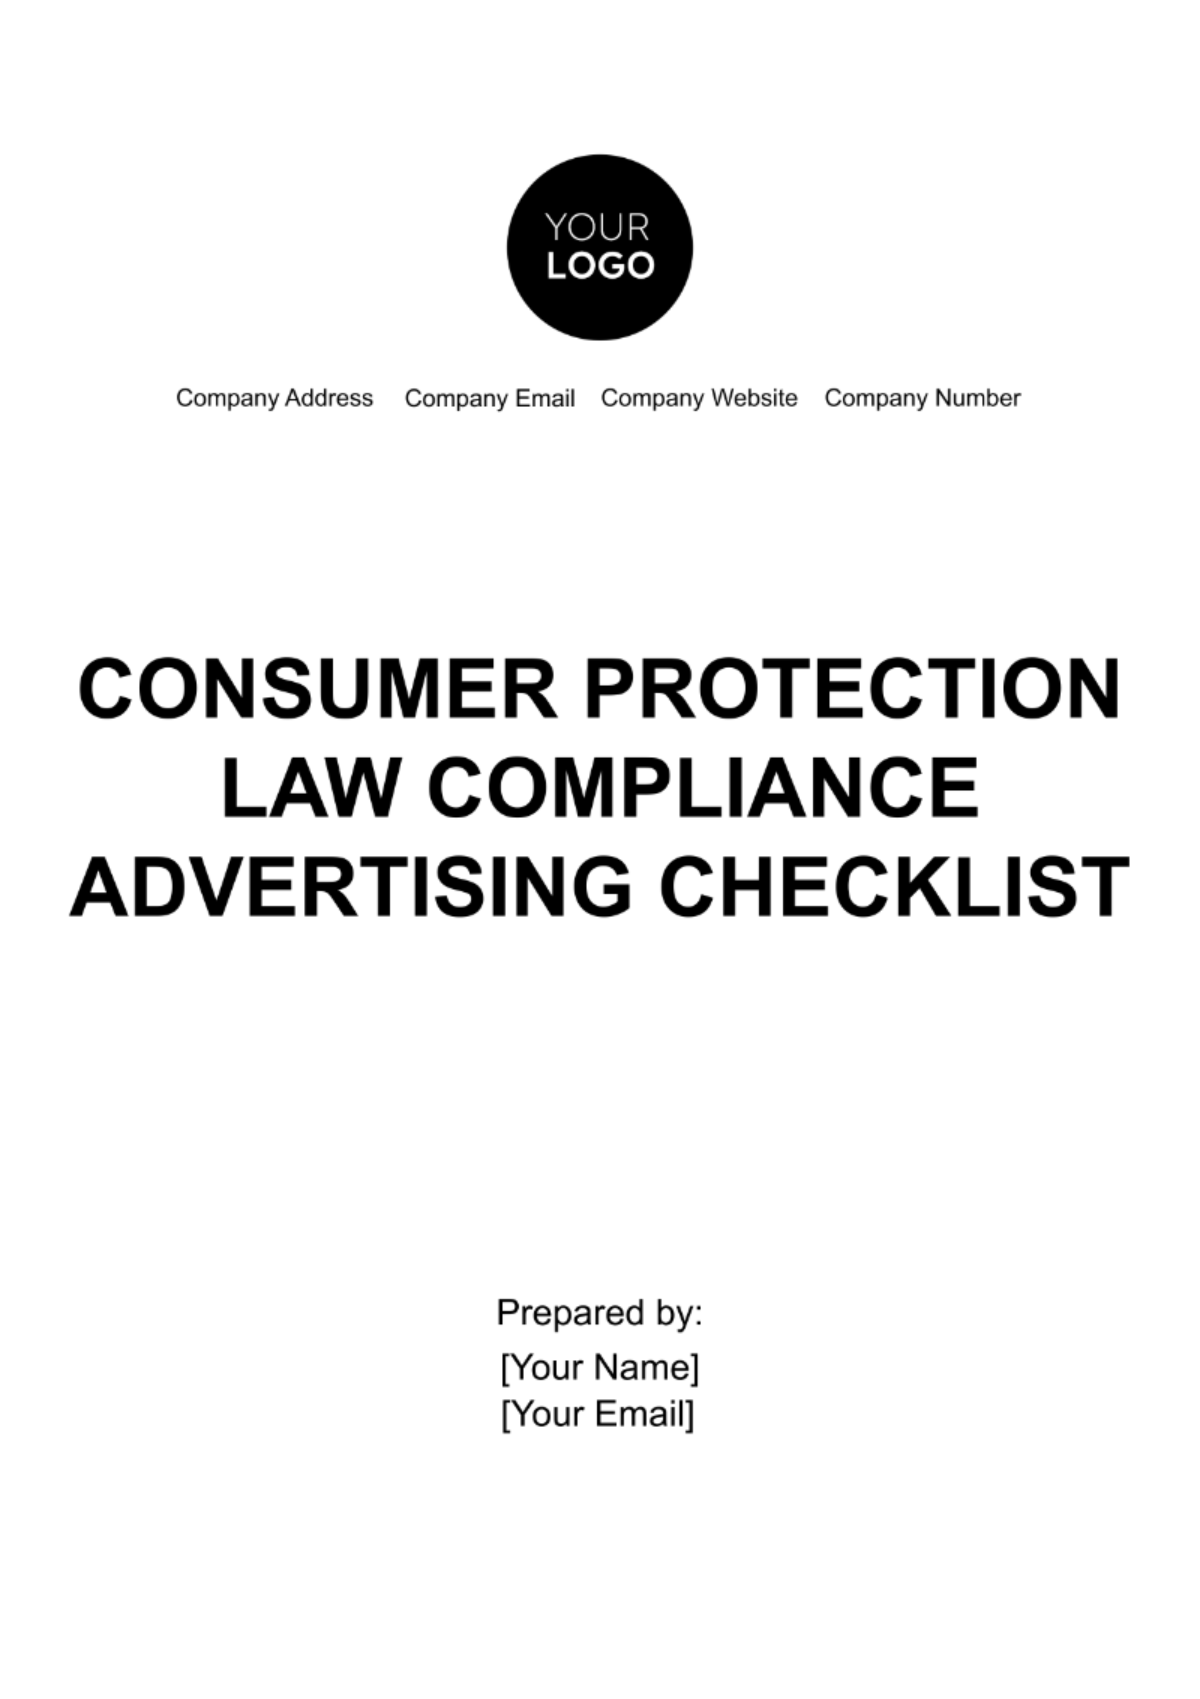 Consumer Protection Law Compliance Advertising Checklist Template